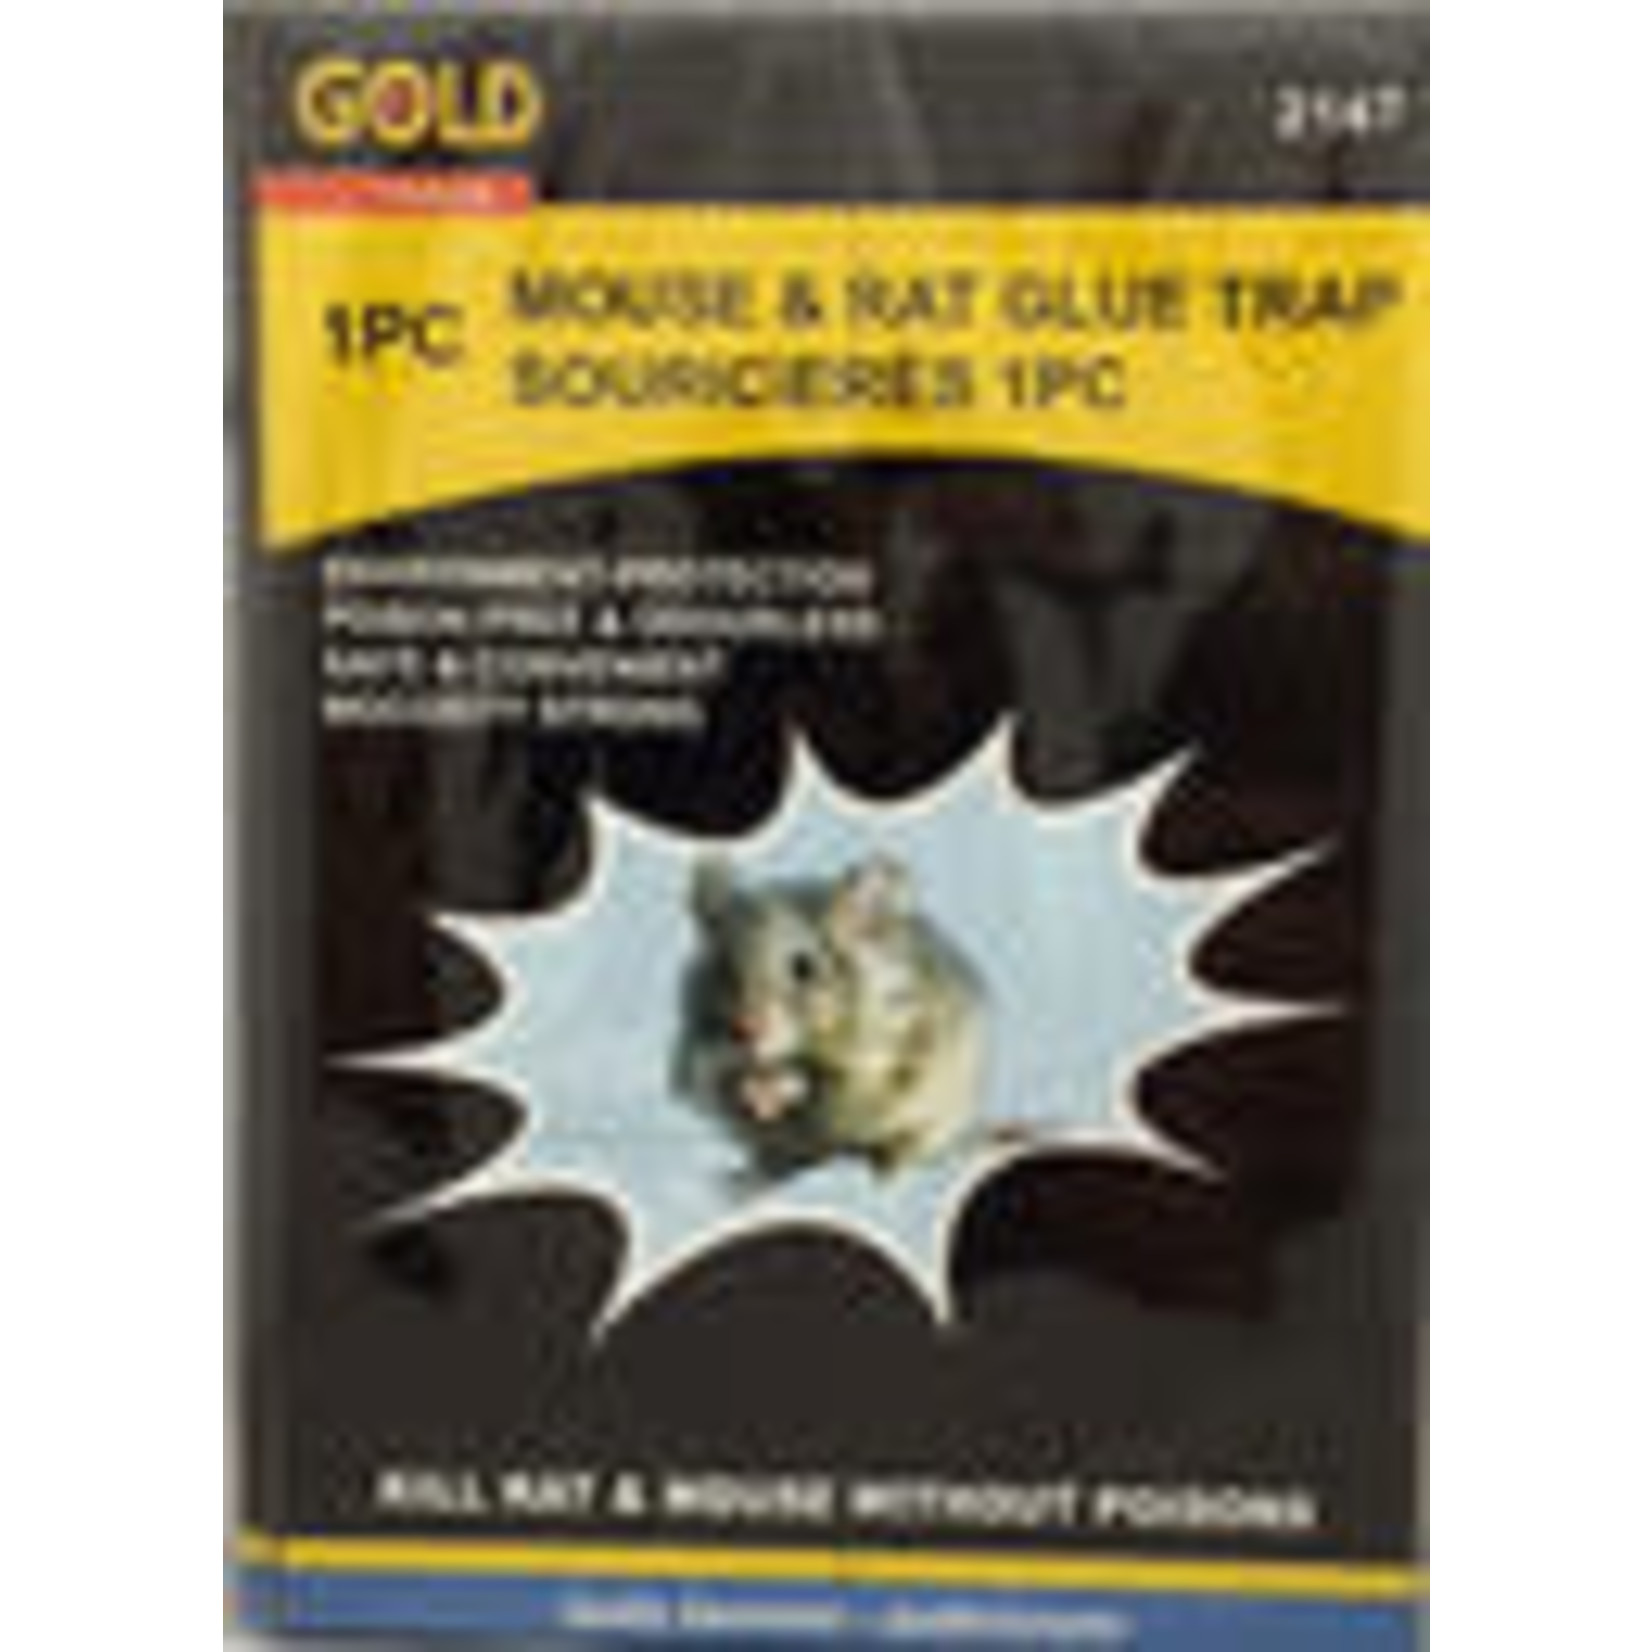 MOUSE AND RAT GLUE TRAP